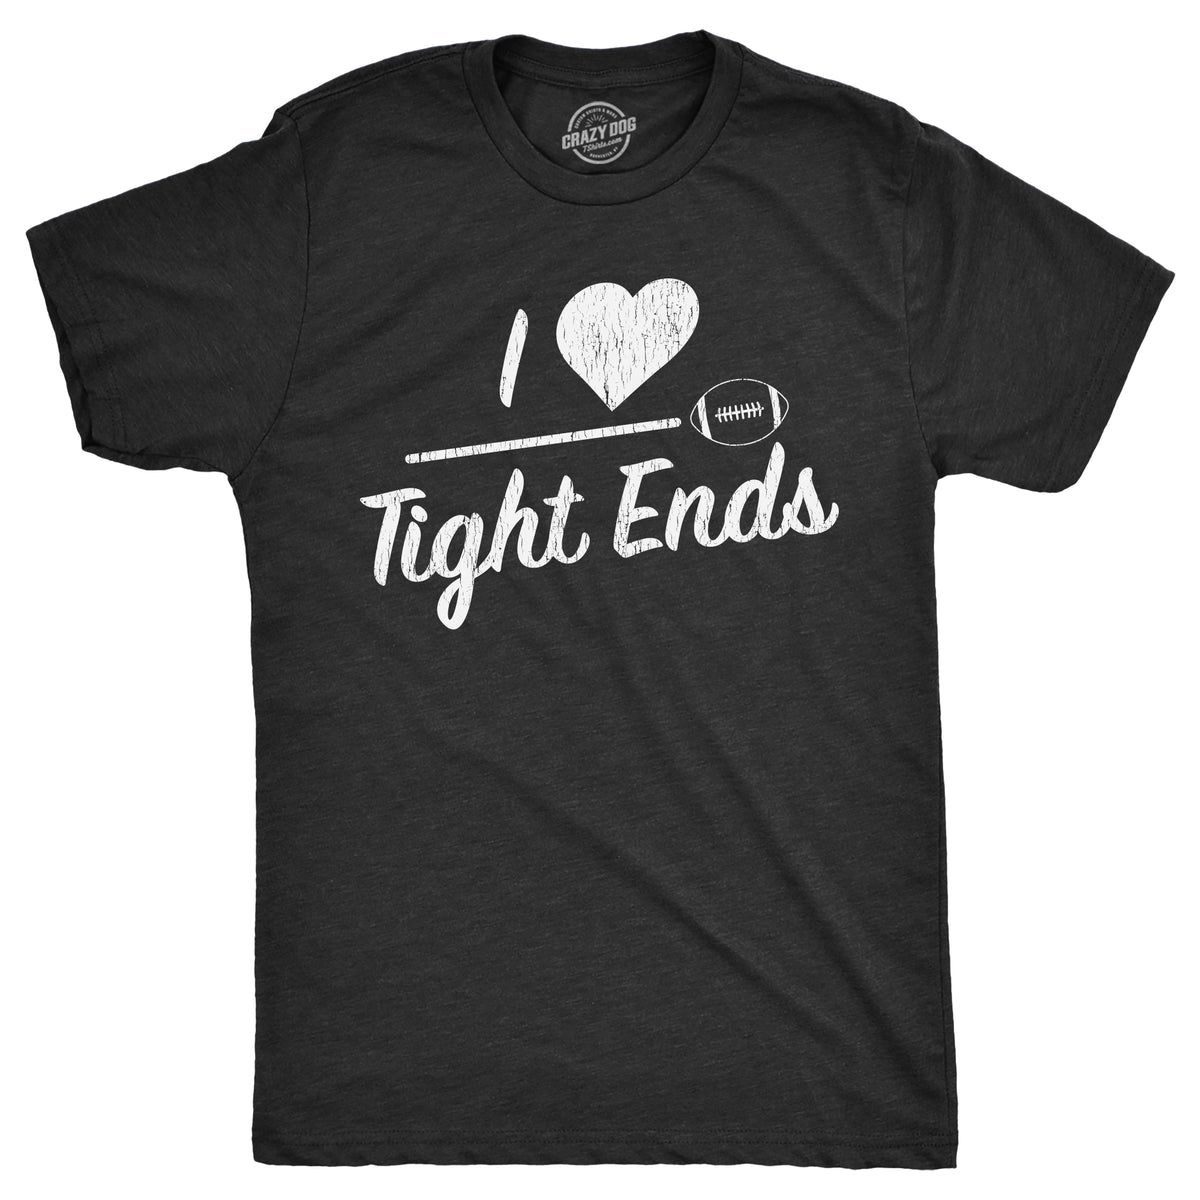 Funny Heather Black - TIGHTENDS I Heart Tight Ends Mens T Shirt Nerdy Football sarcastic Tee